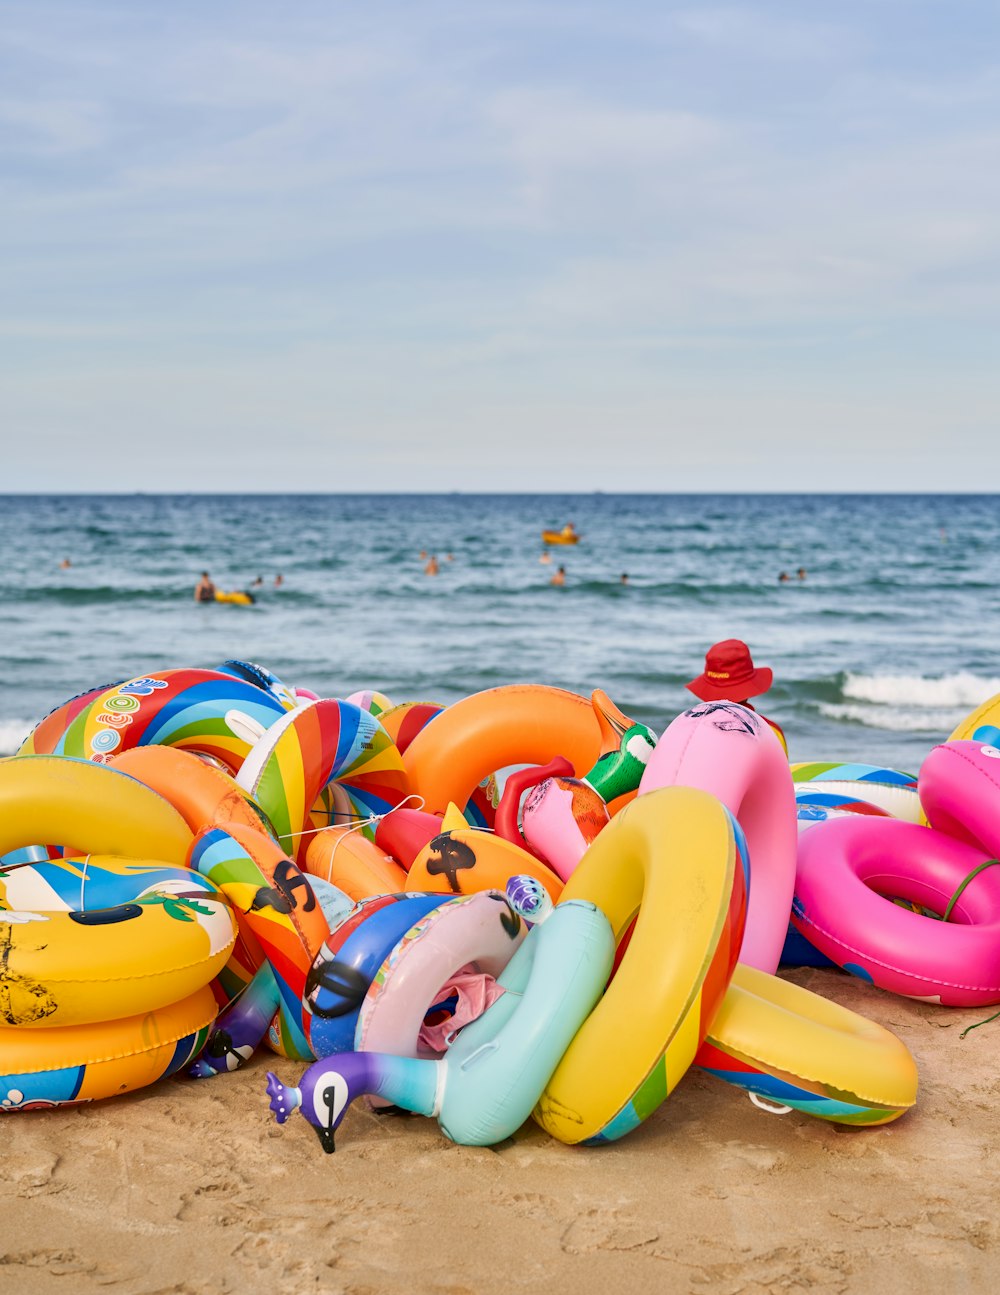 a group of colorful plastic toys on a beach